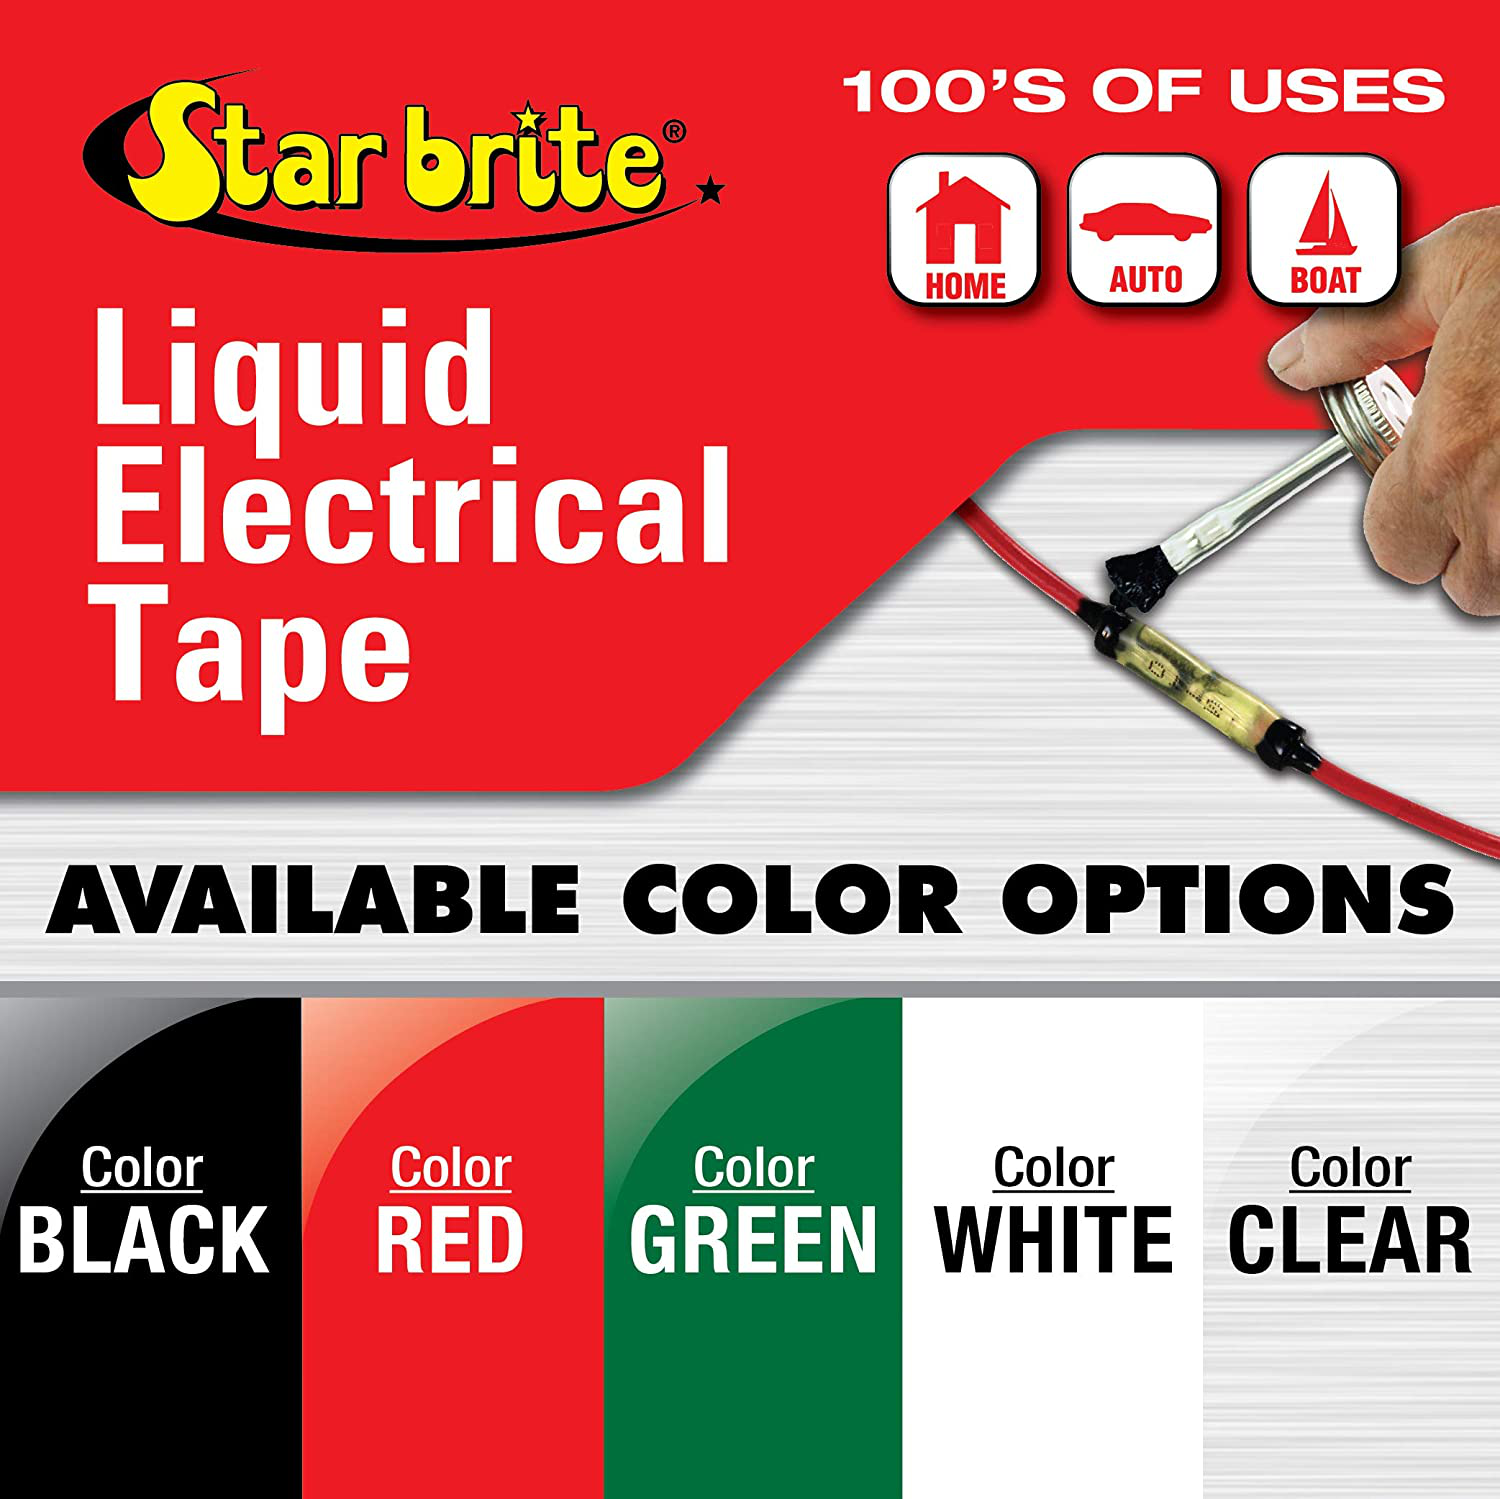 Star Brite Liquid Electrical Tape - 4 Oz Can with Applicator Brush Cap - Protective, Airtight, Waterproof, Flexible, Dielectric Coating - Indoor & Outdoor Use